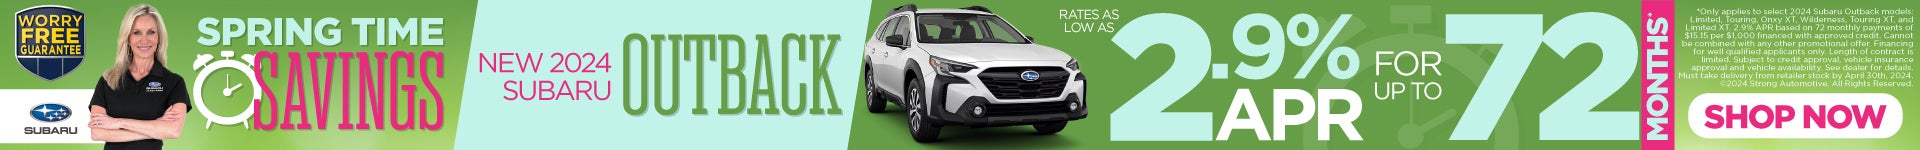 New 2024 Subaru Outback - 2.9% APR for up to 72 months* - Shop Now